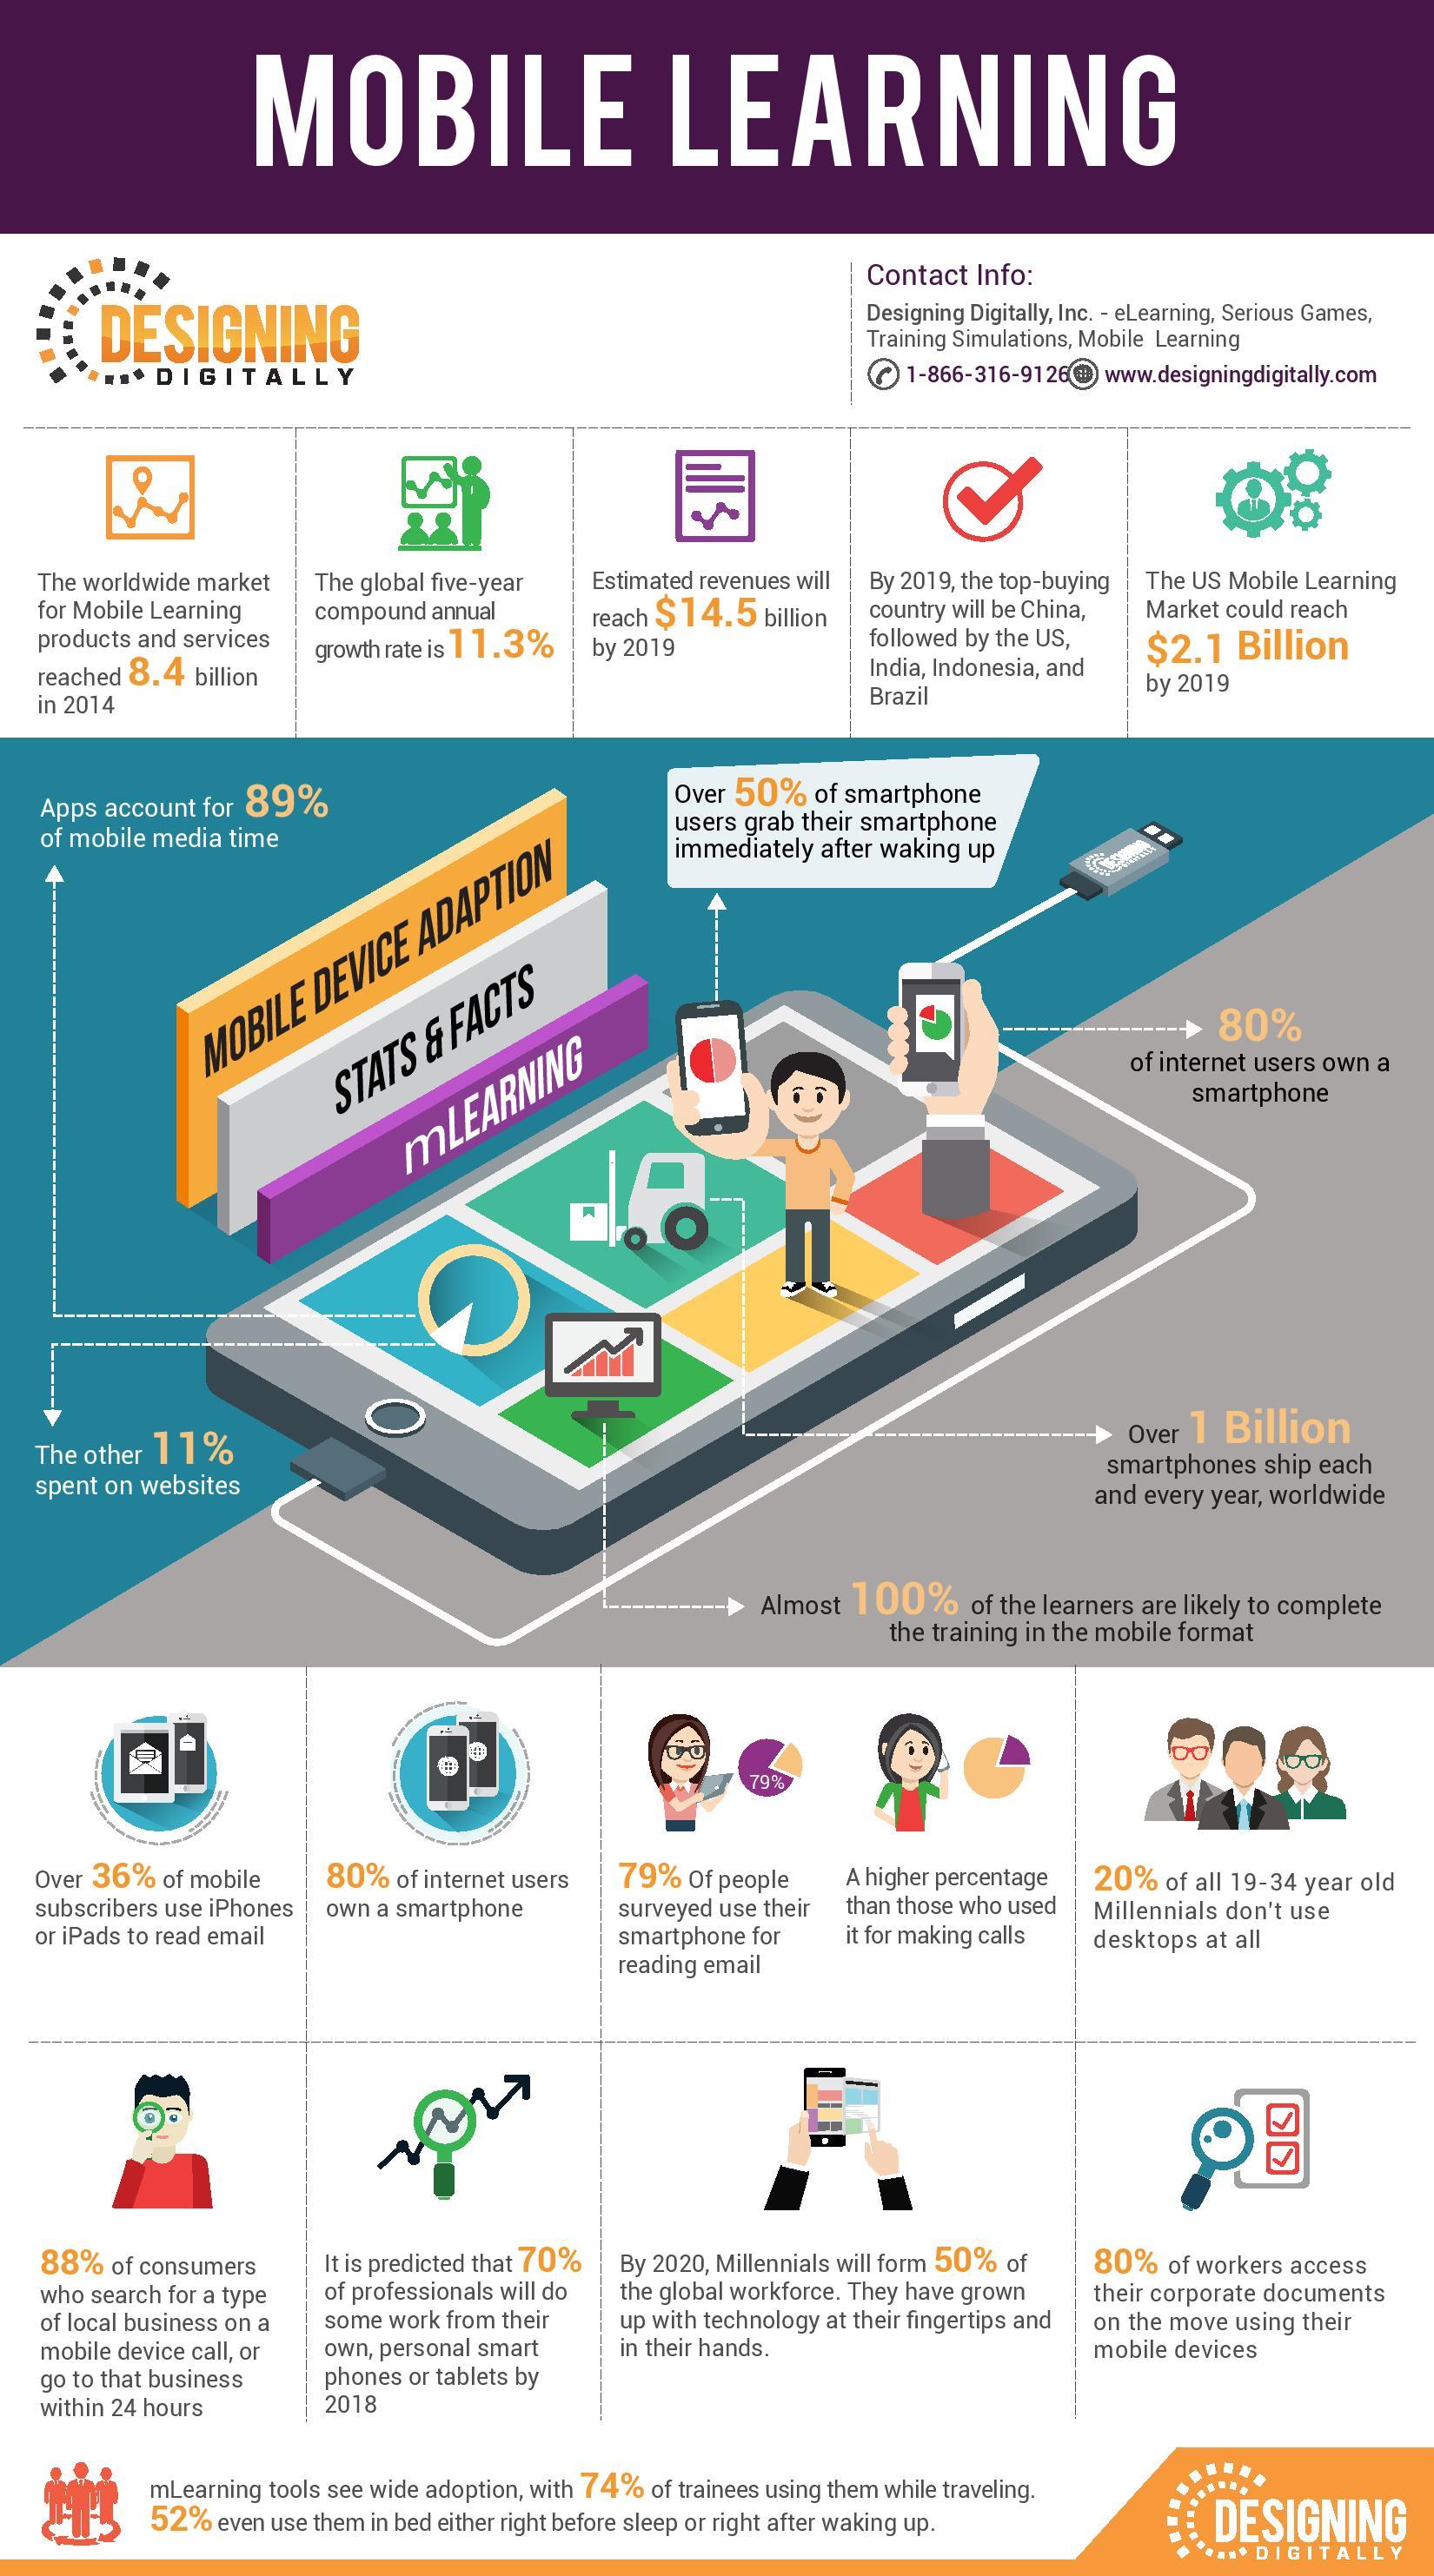 Mobile Device Adoption Stats and Facts Infographic